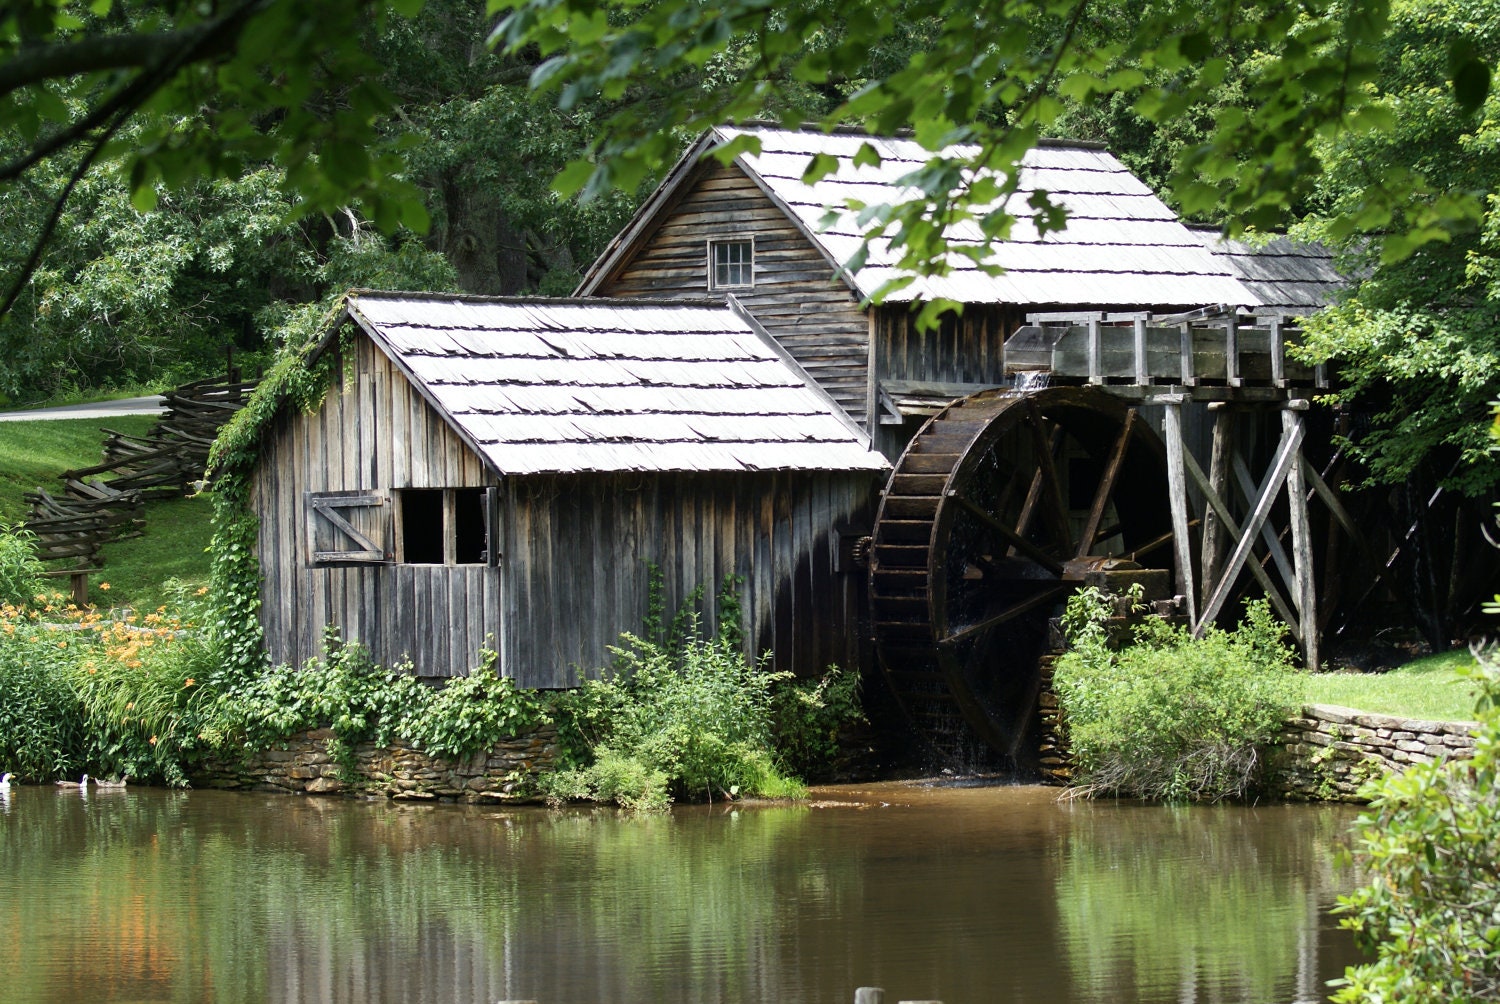 Mabry Grist Mill, Landscape Photography, Historic, Army Veteran, Blue Ridge Parkway-2" - HLRoperPhotography